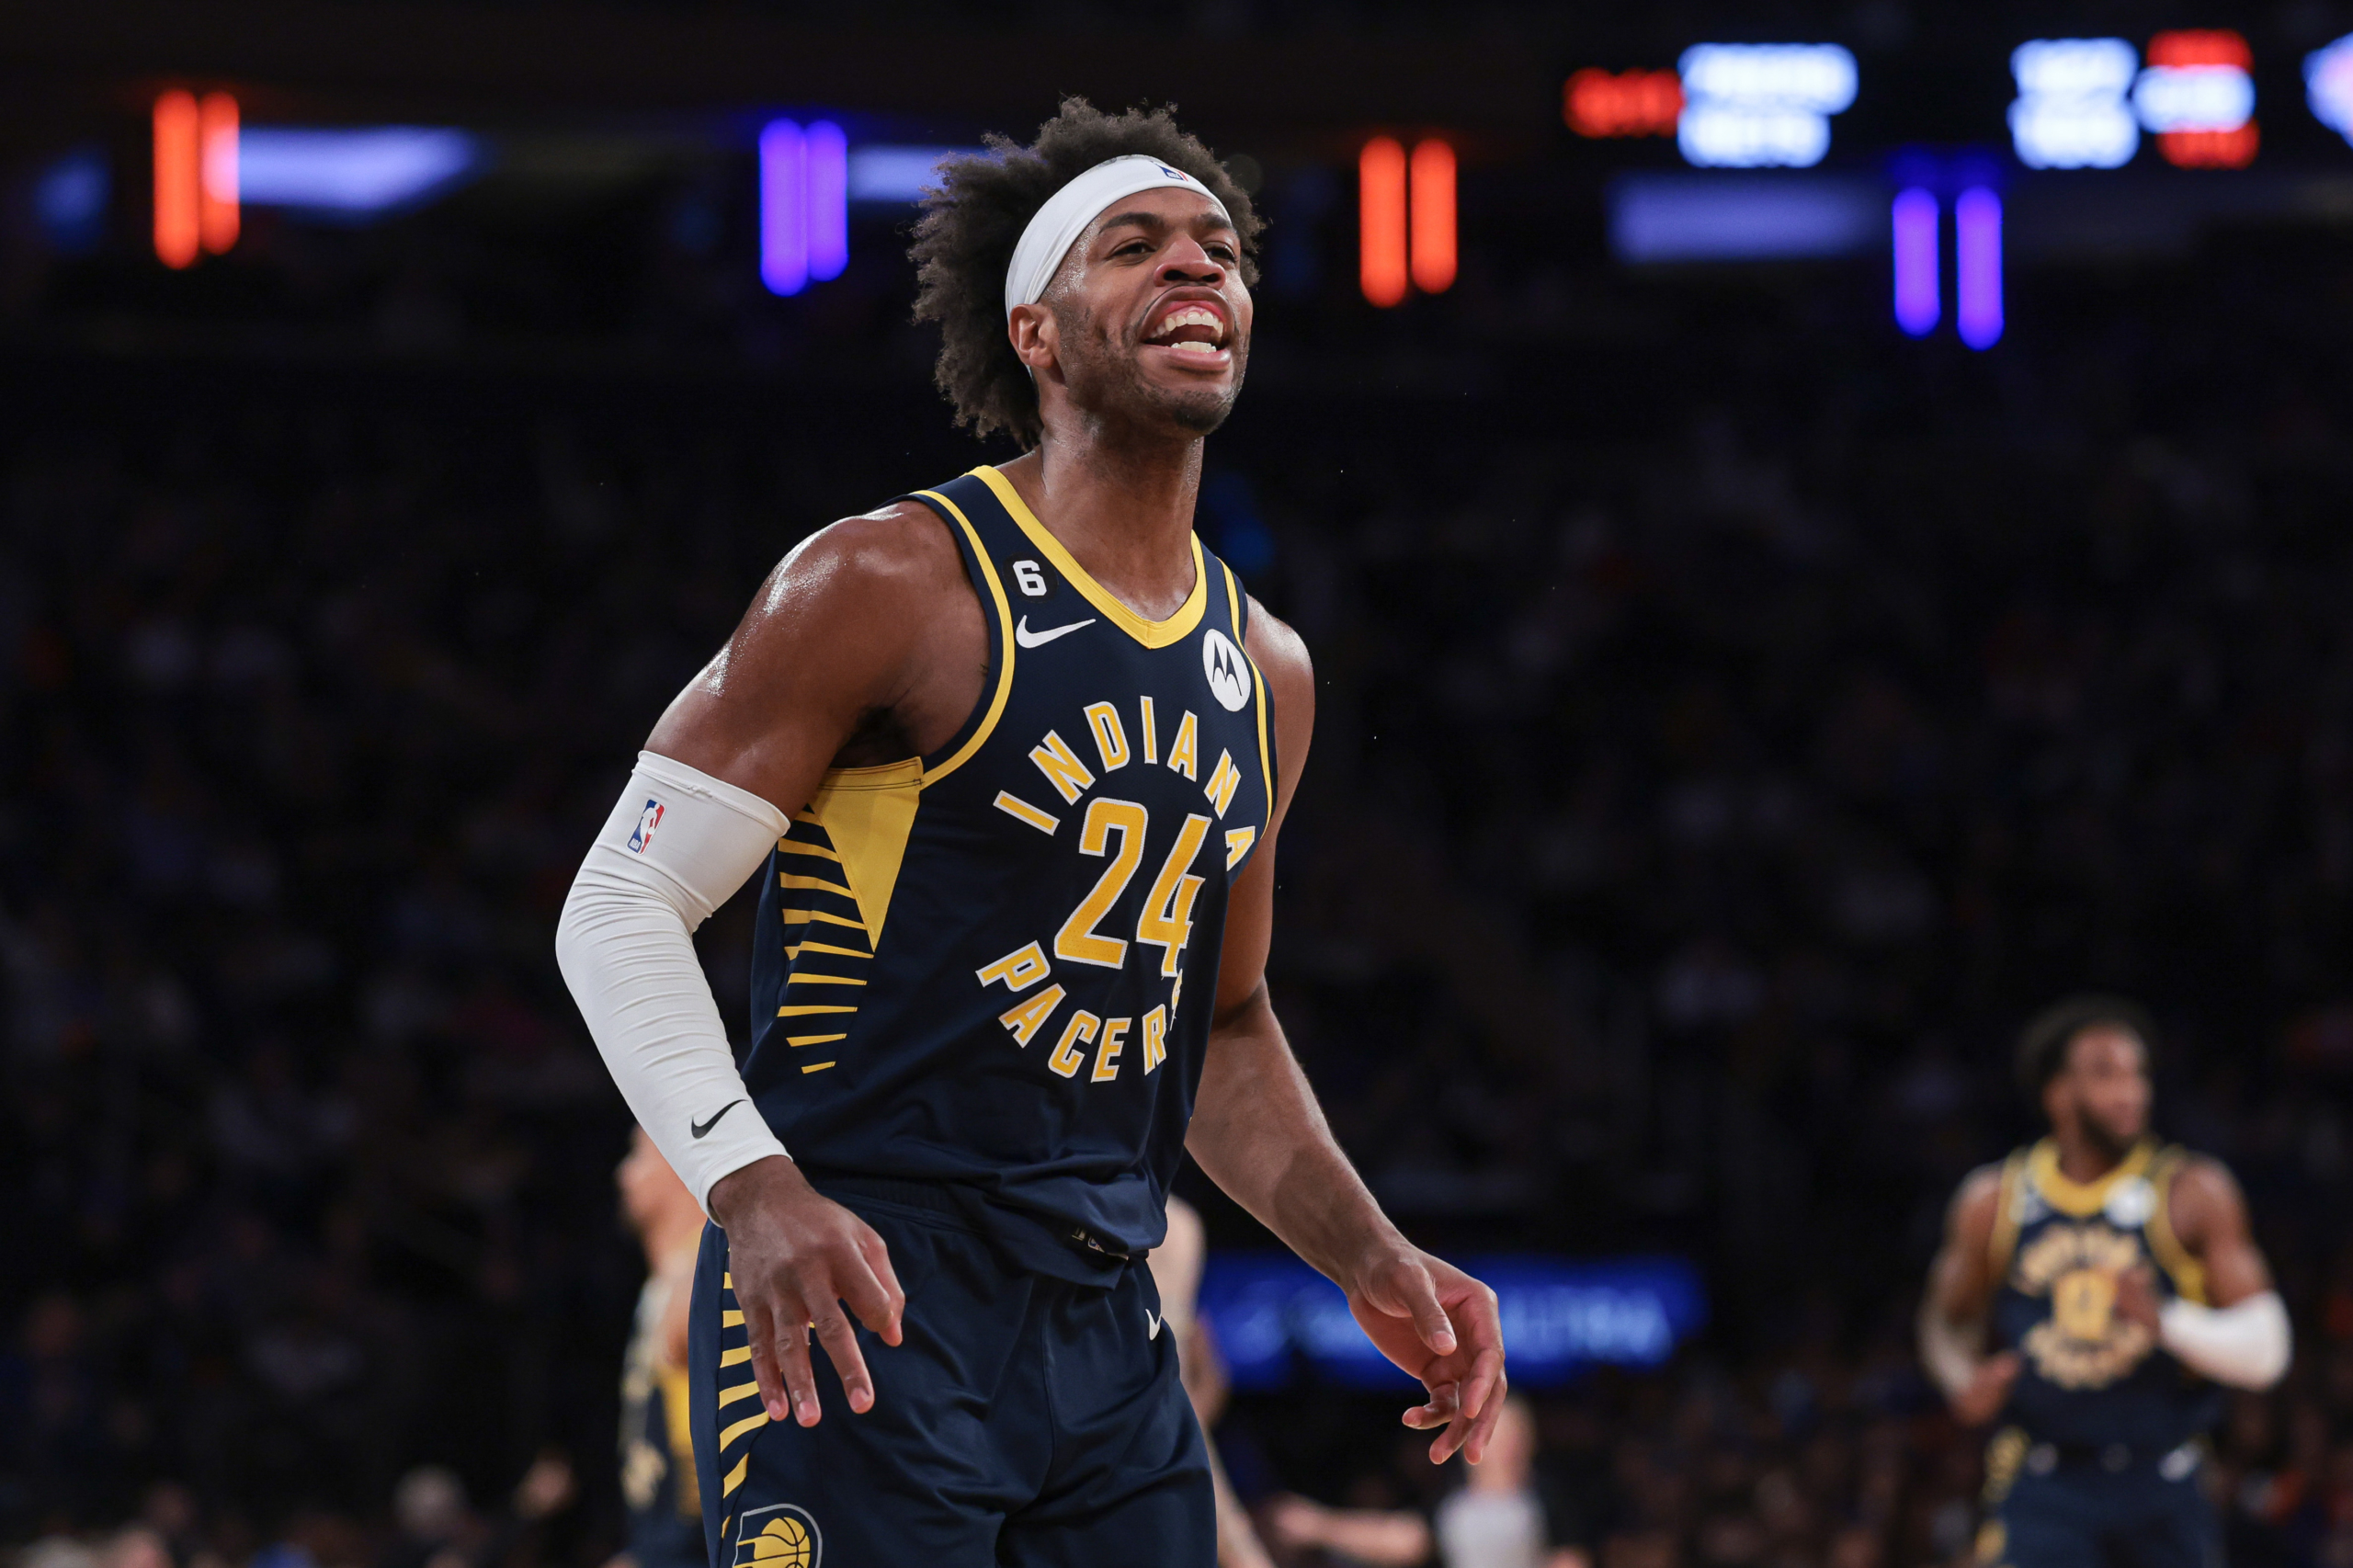 NBA Rumors: 3 Trade Targets For Indiana Pacers To Re-Tool Roster